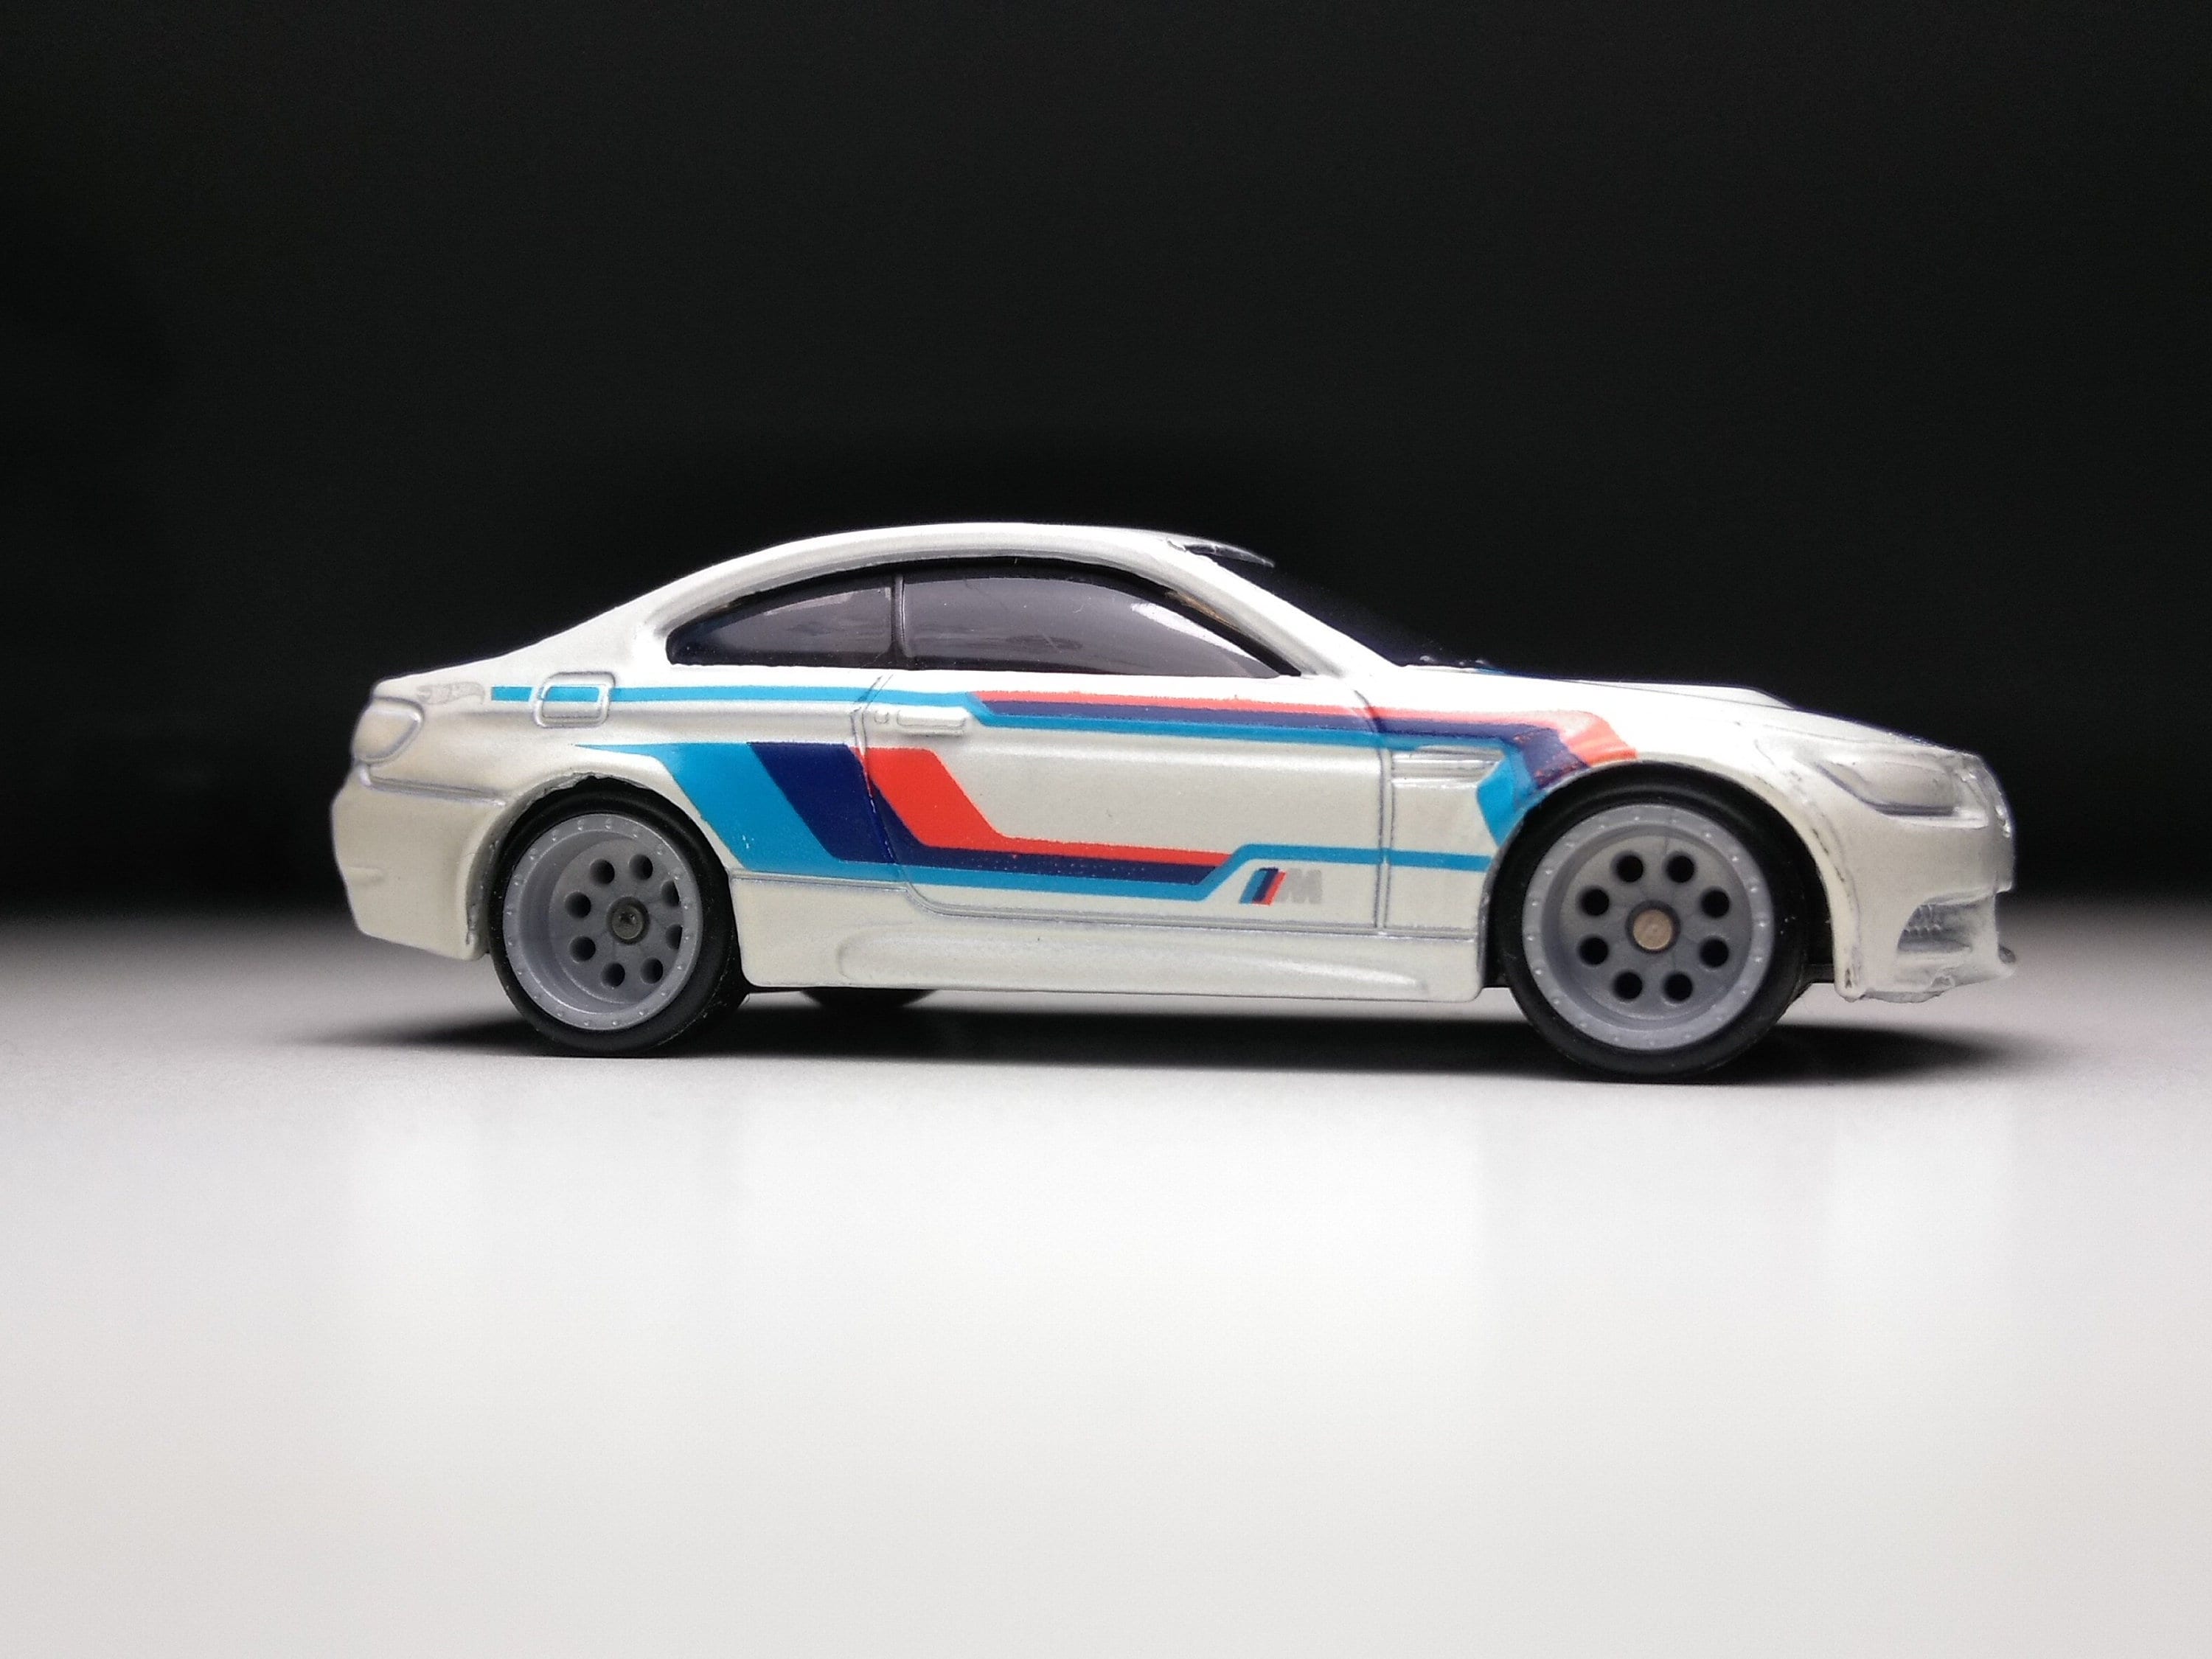 BMW M3 Hot Wheels custom Real Rubber Tires 